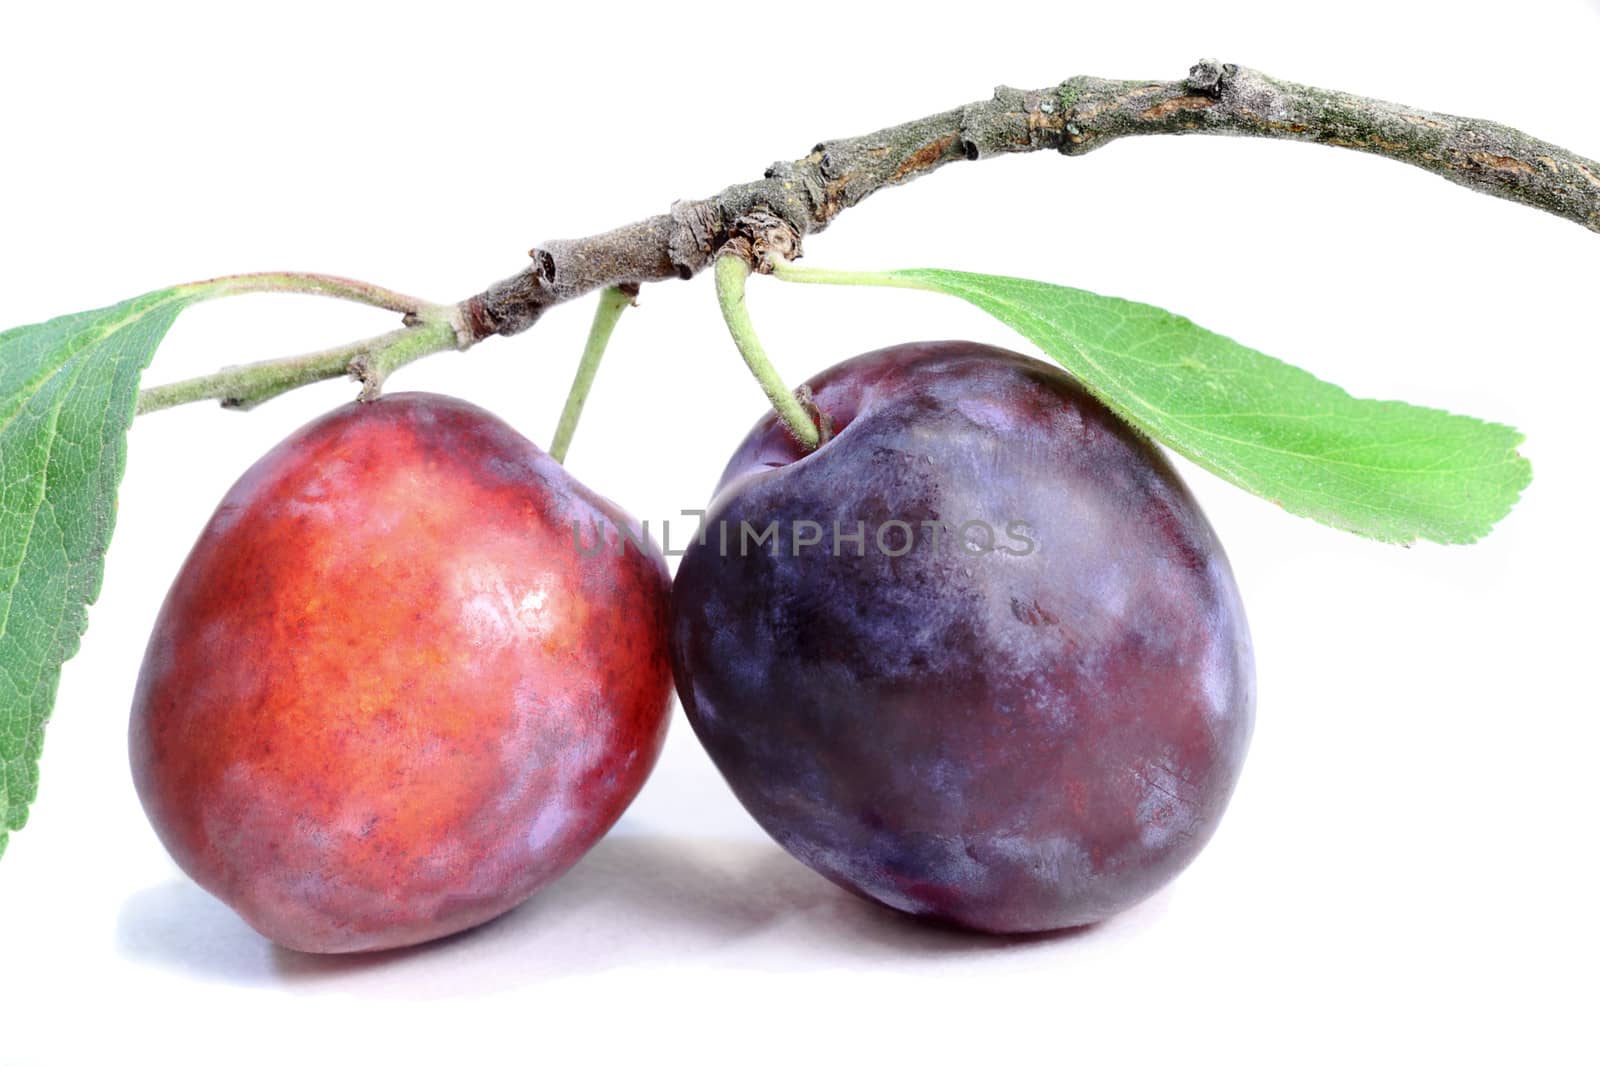 Two large ripe plums with a sprig of wood and leaves. Presented on a white background.